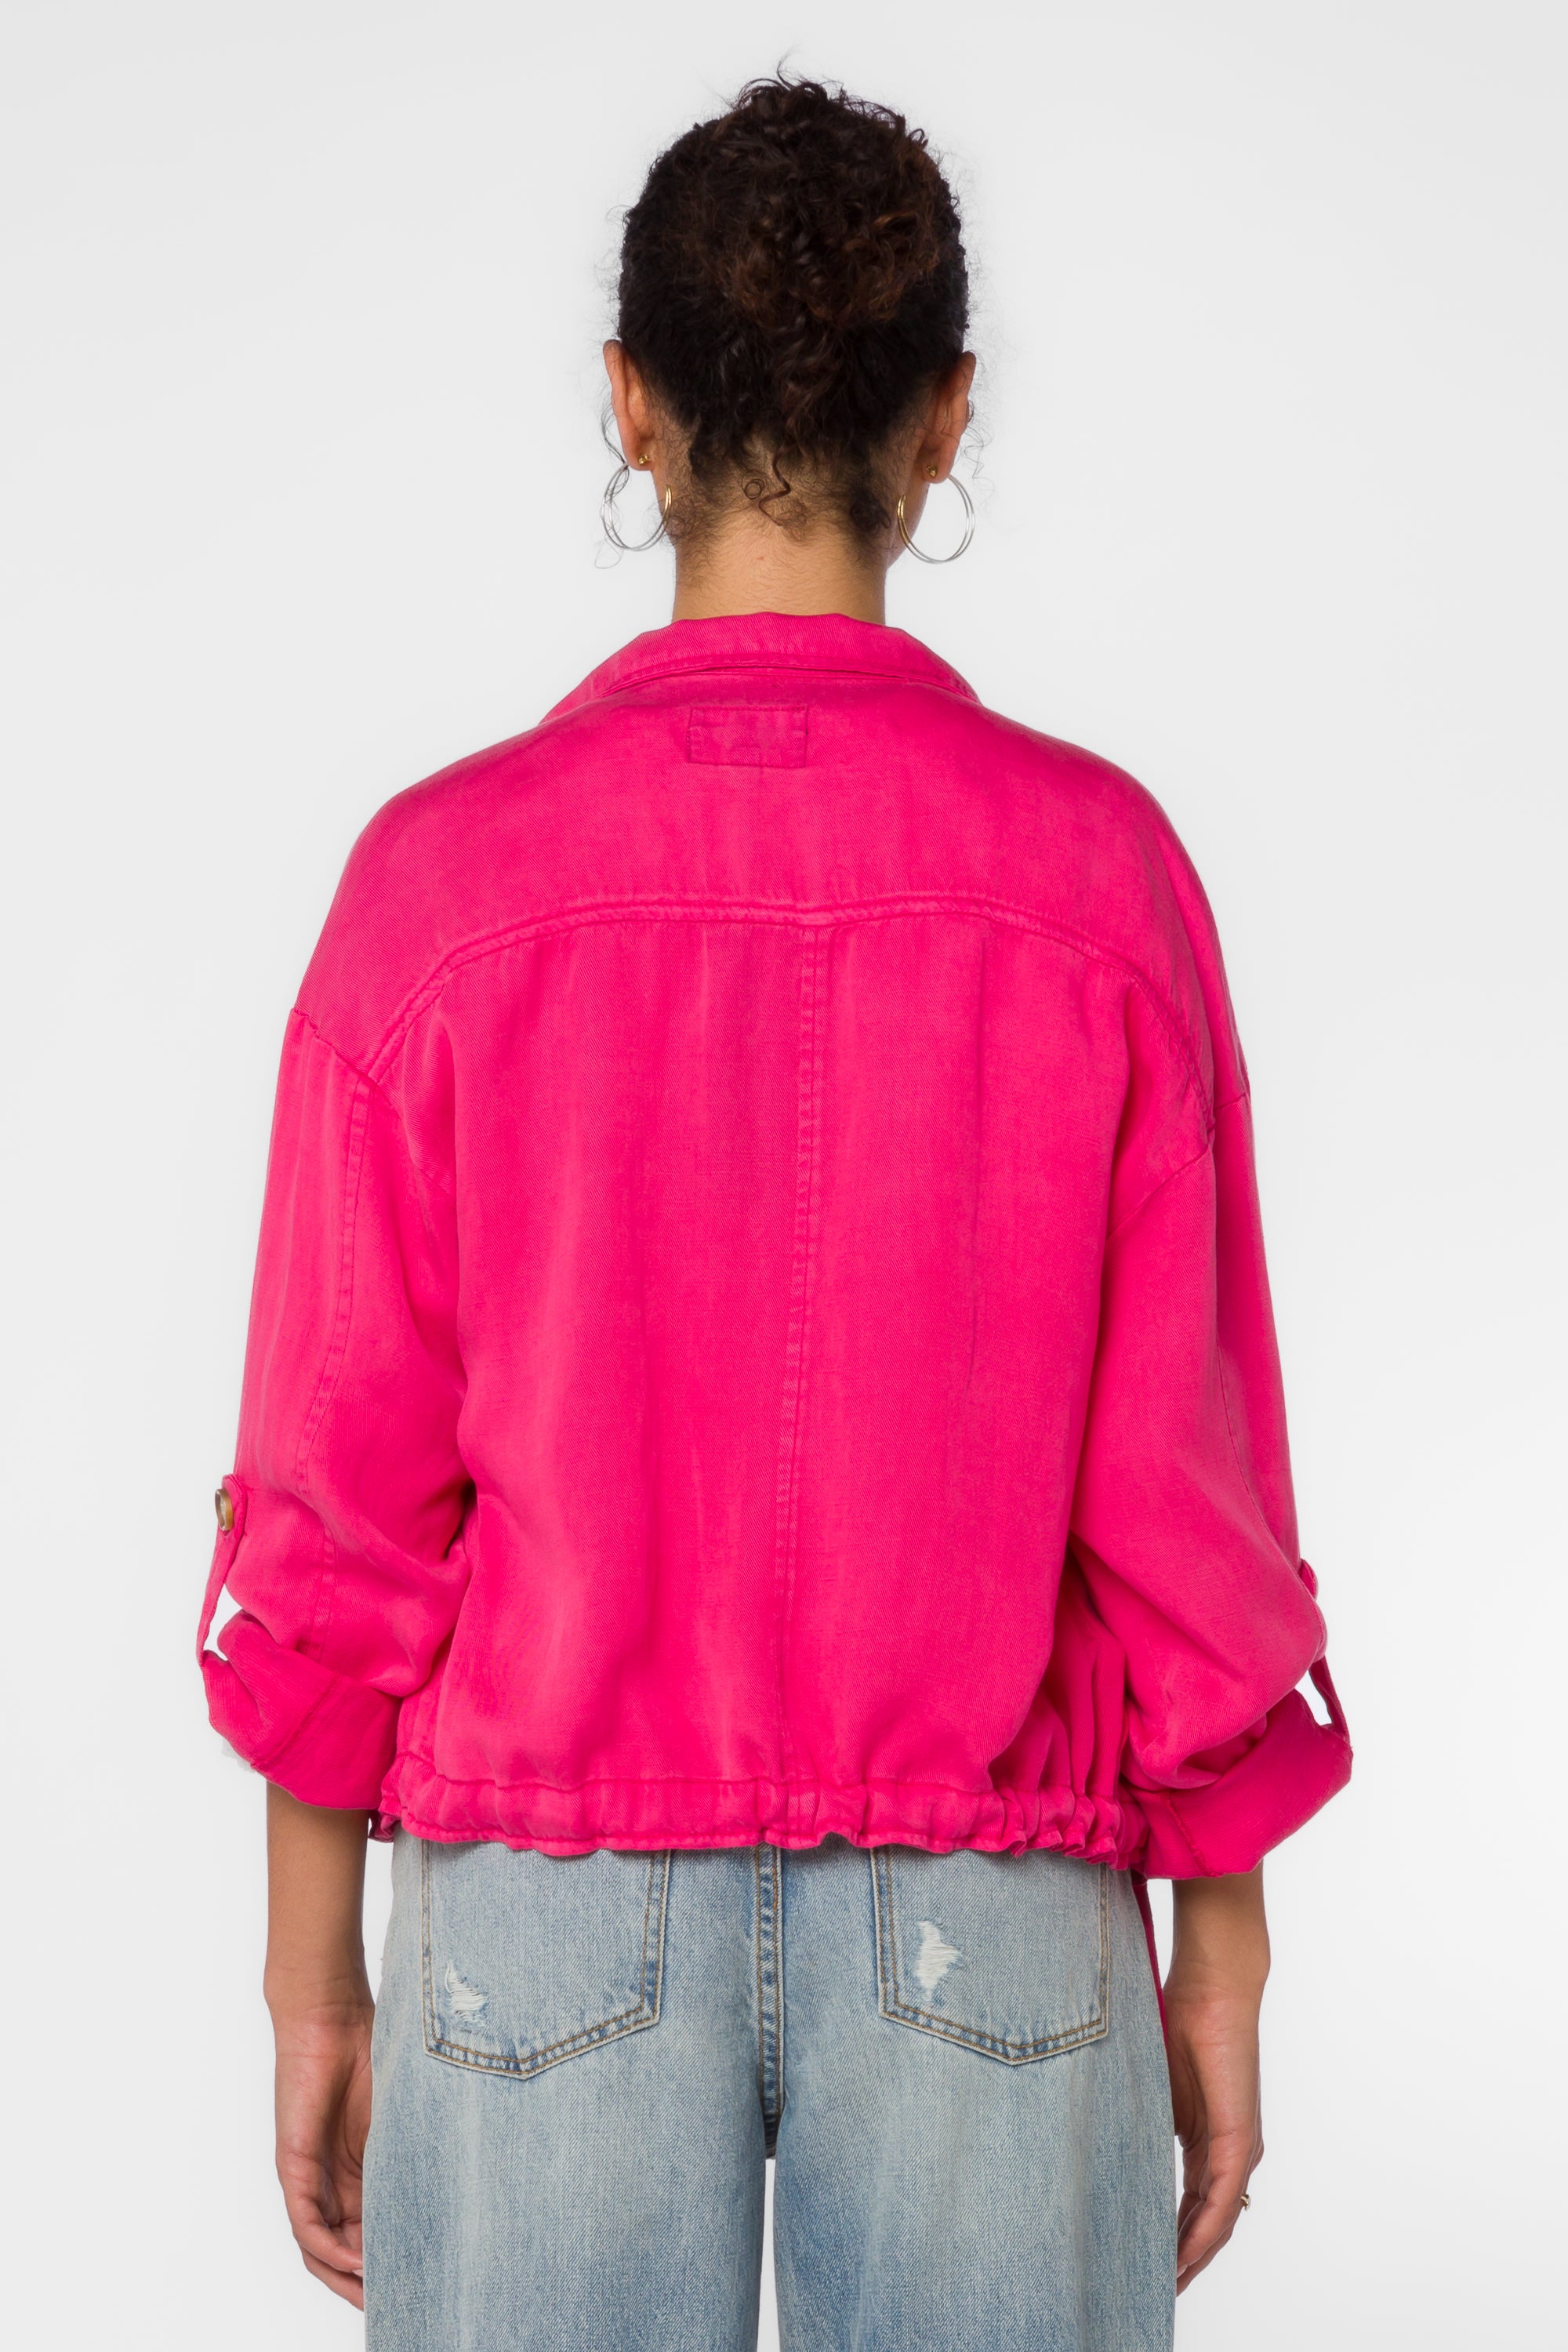 Rogue Pink Berry Jacket - Jackets & Outerwear - Velvet Heart Clothing